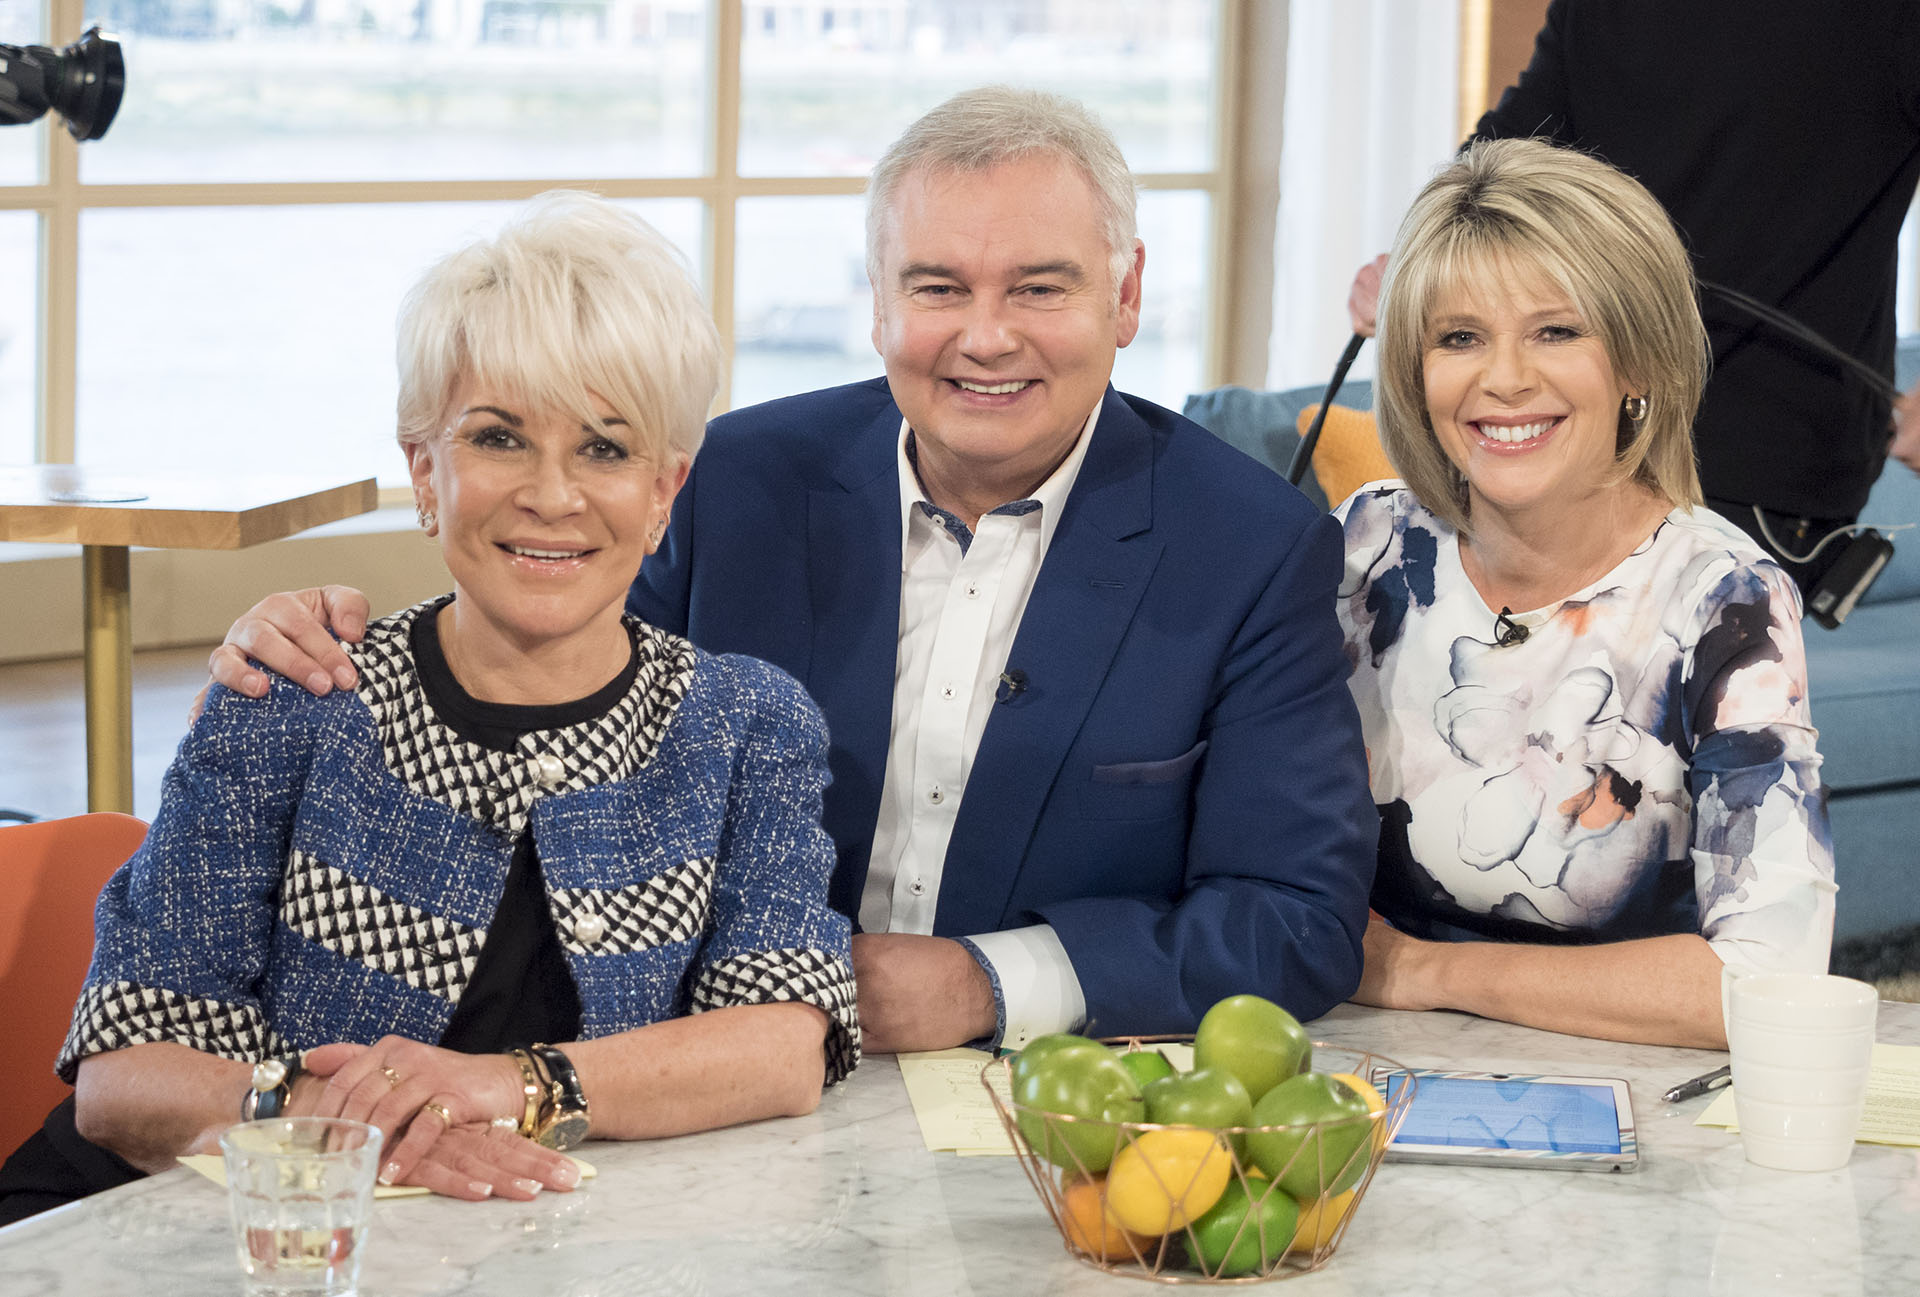 Eamonn Holmes: “I feel the pressure of staying in the spotlight”